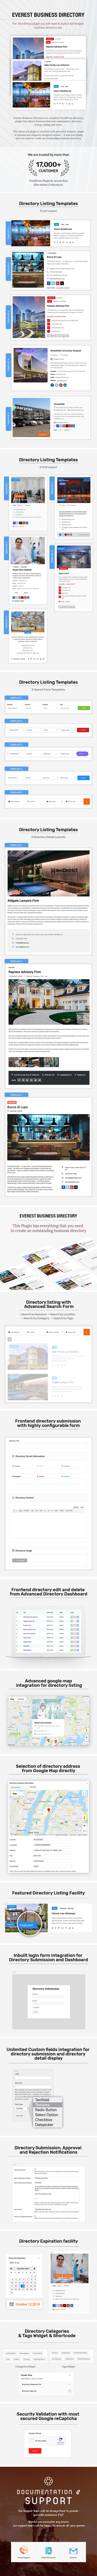 Everest Business Directory - A Complete Business Directory WordPress Plugin - 2